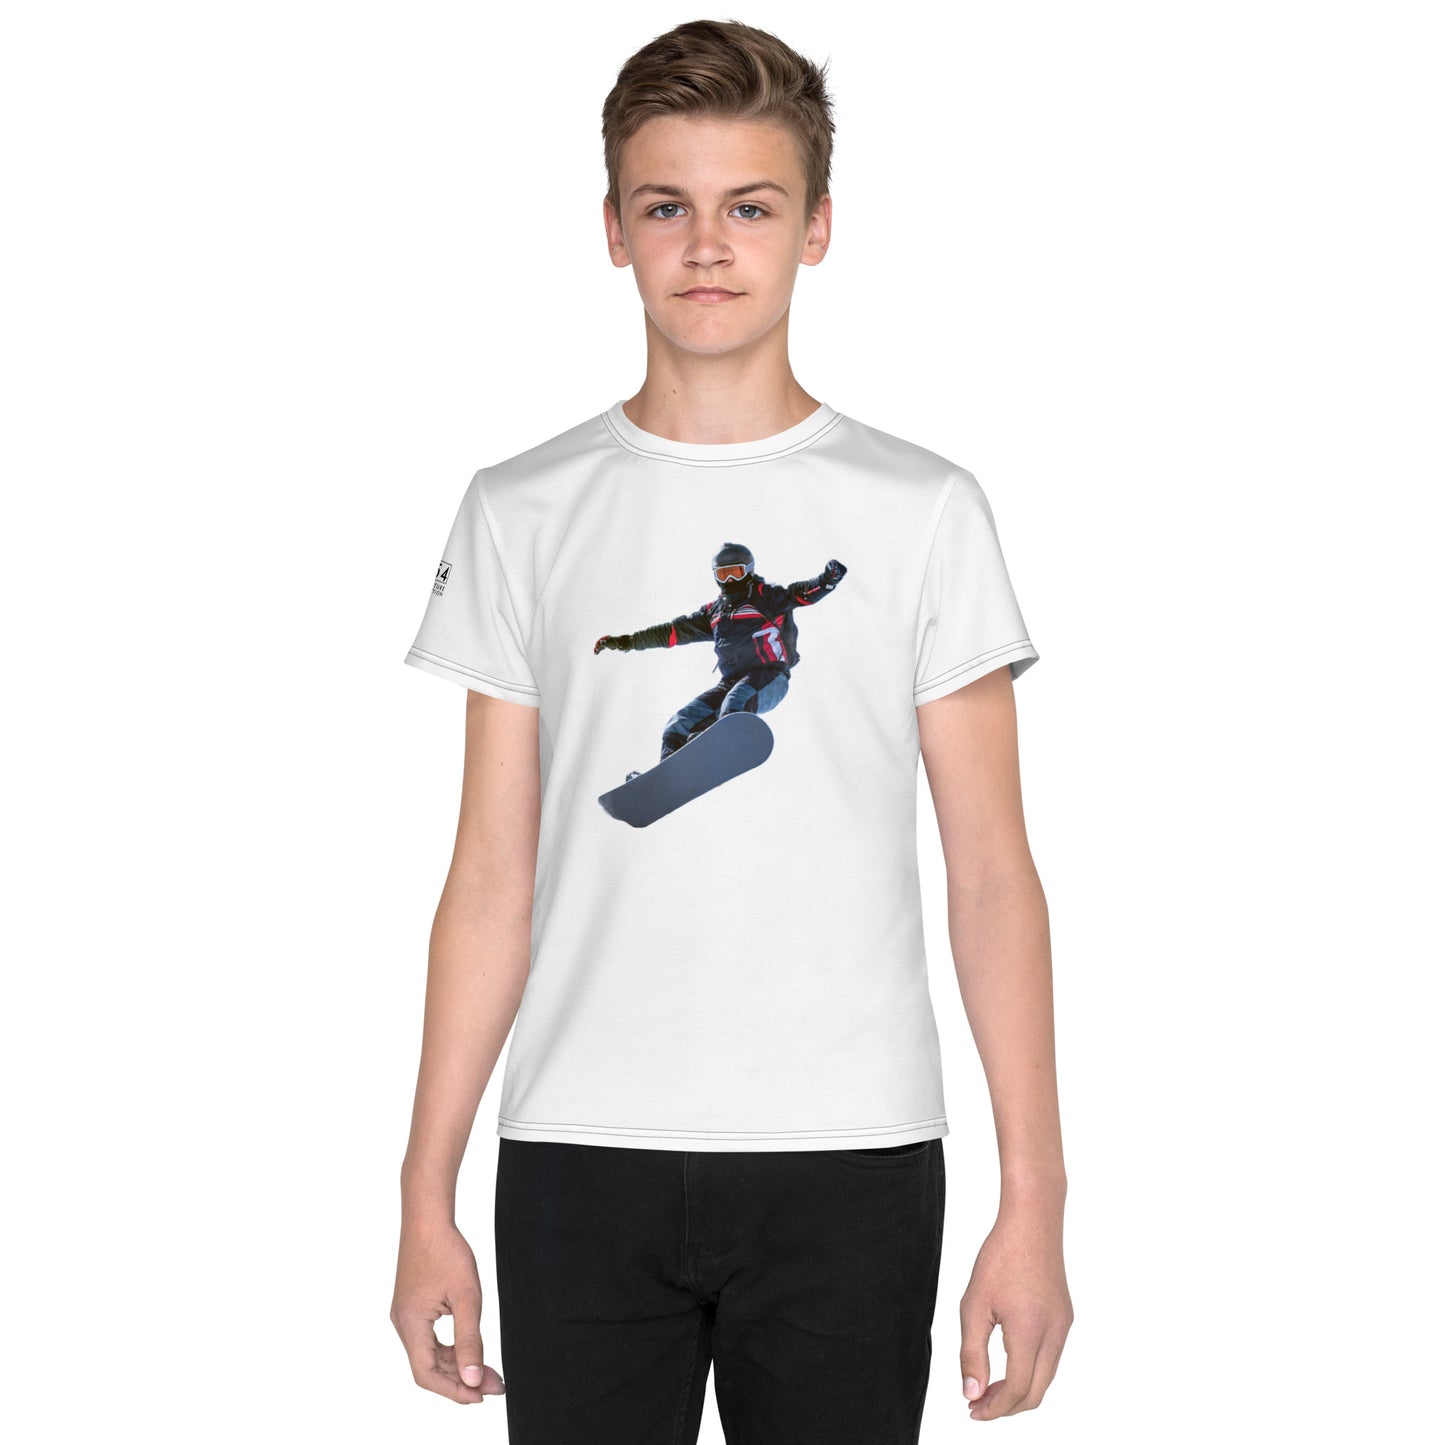 Snowboarding 954 Youth crew neck t-shirt